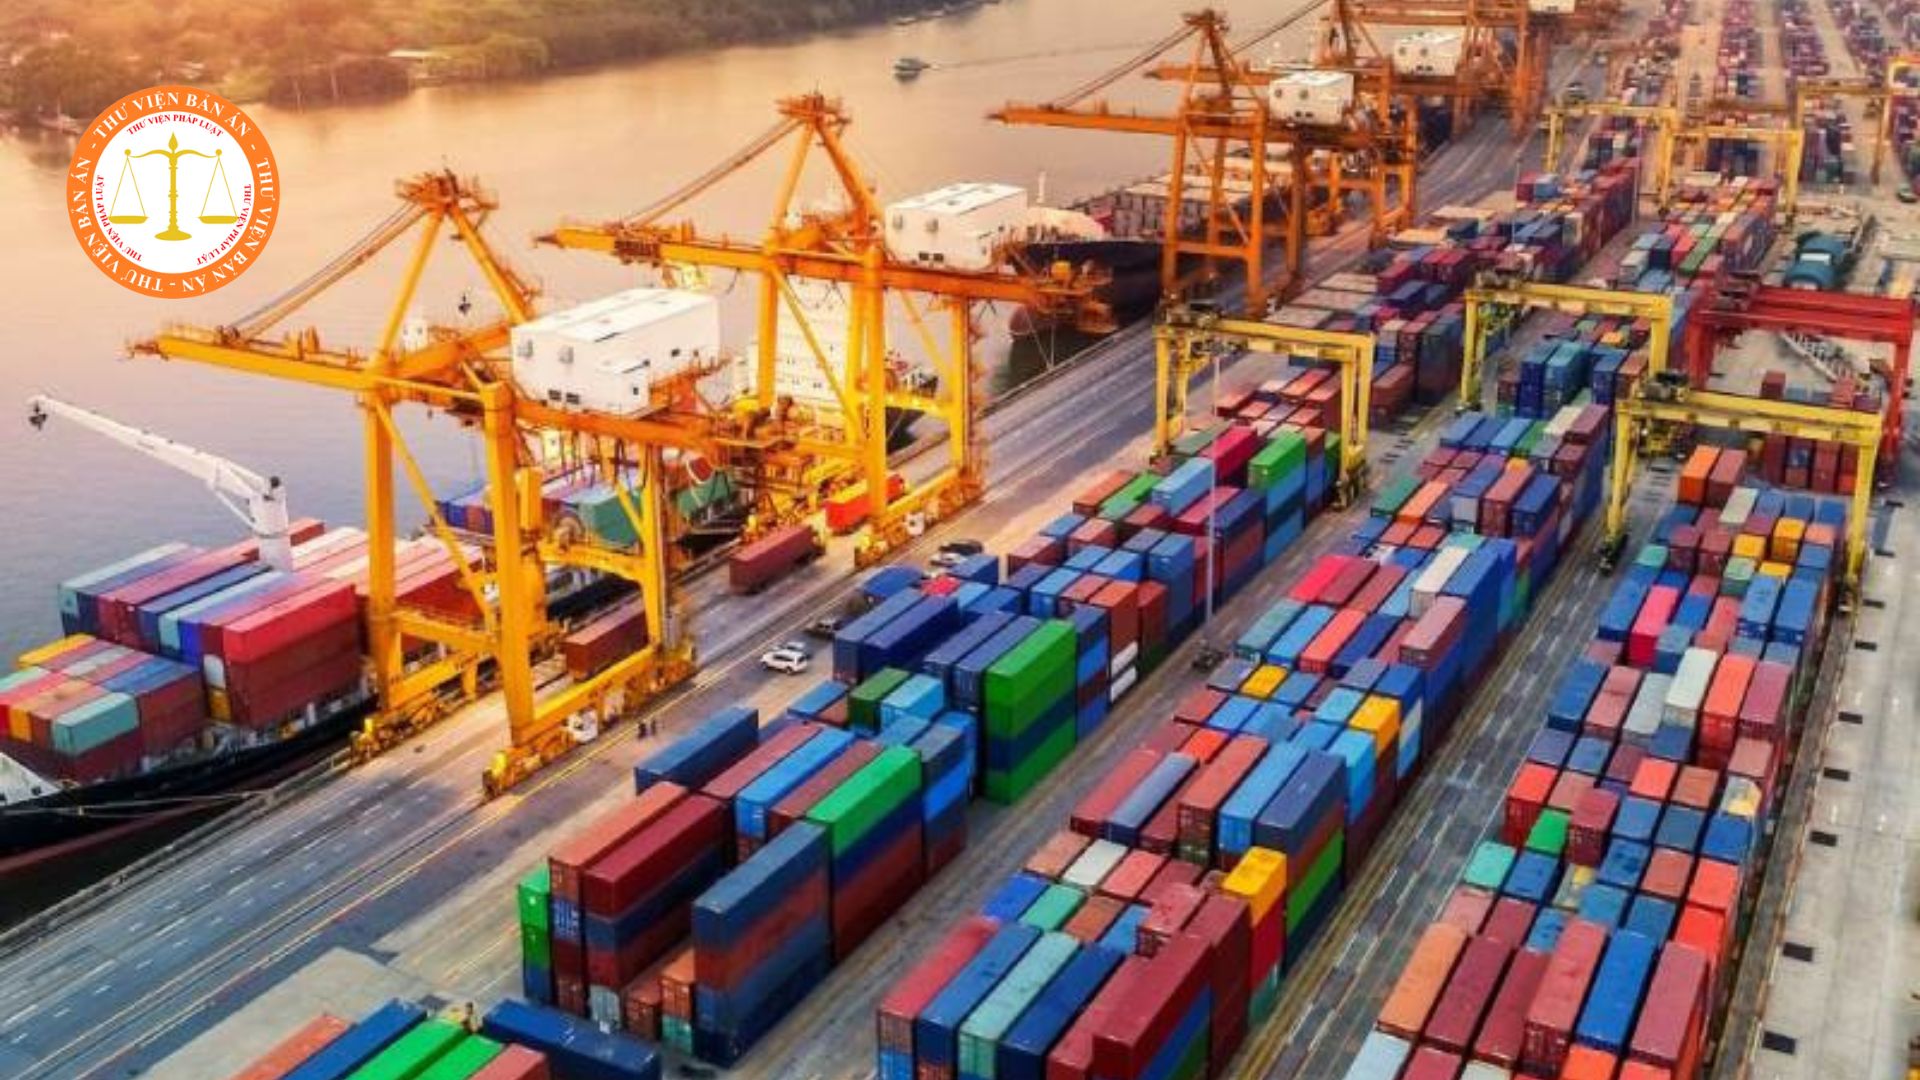 What is included in the application for issuance of the license for importing commodities under the tariff-rate quotas in Vietnam?